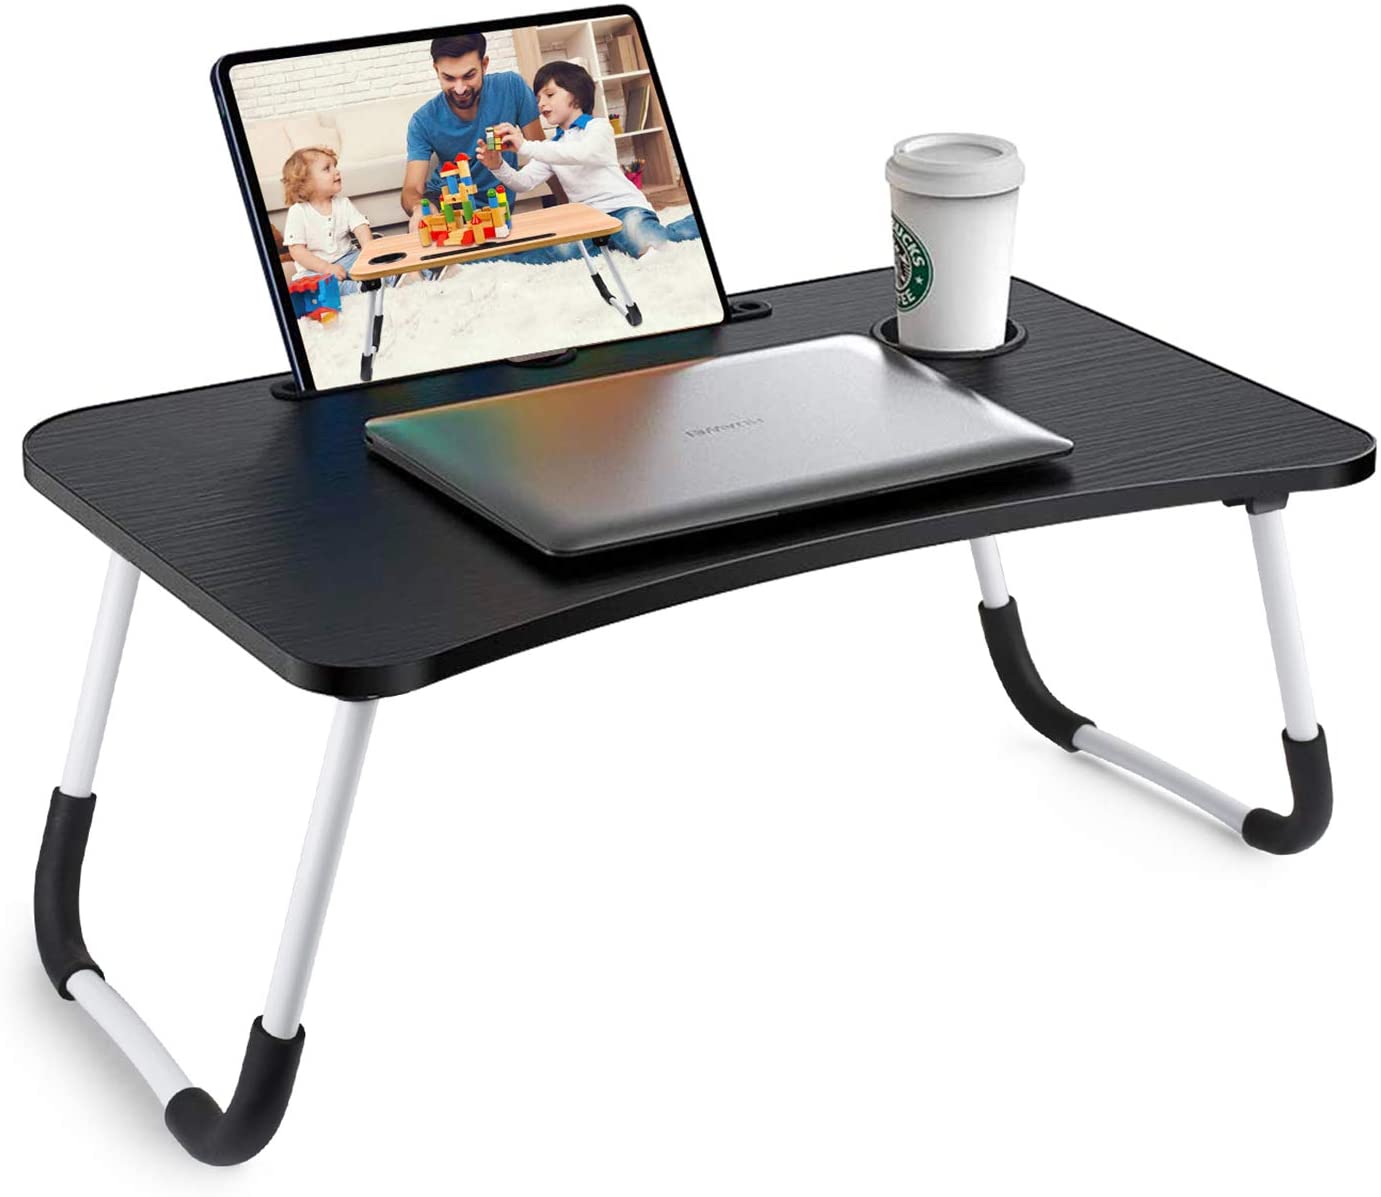 Multifunctional-Folding-Wooden-Lazy-Bed-Desk-Macbook-Table-with-Pen-Cup-Slot-Storage-Drawer-1874952-2